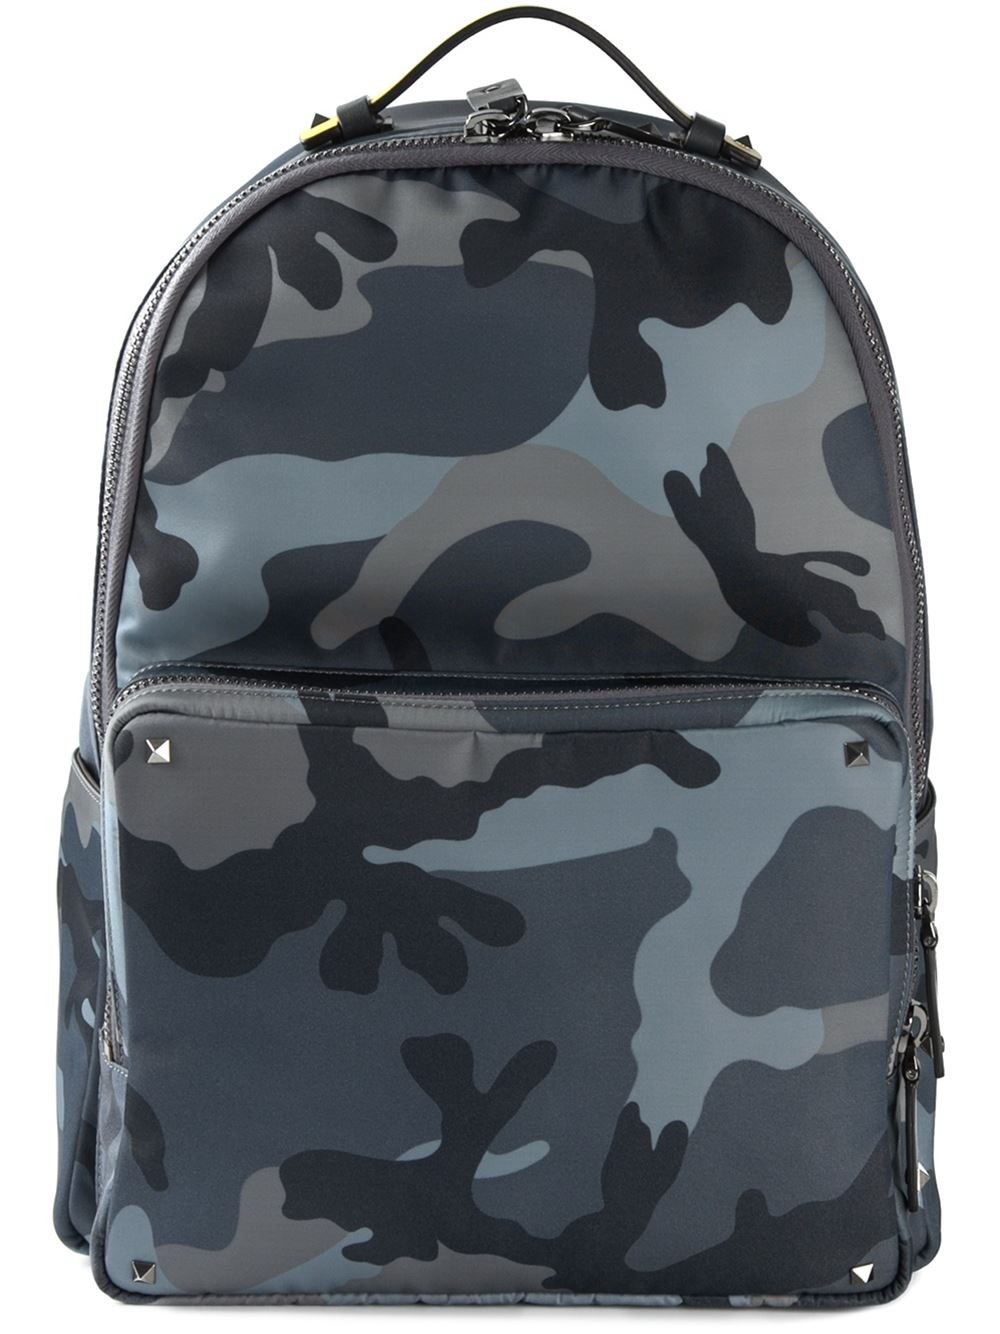 Lyst - Valentino Camouflage Backpack in Gray for Men